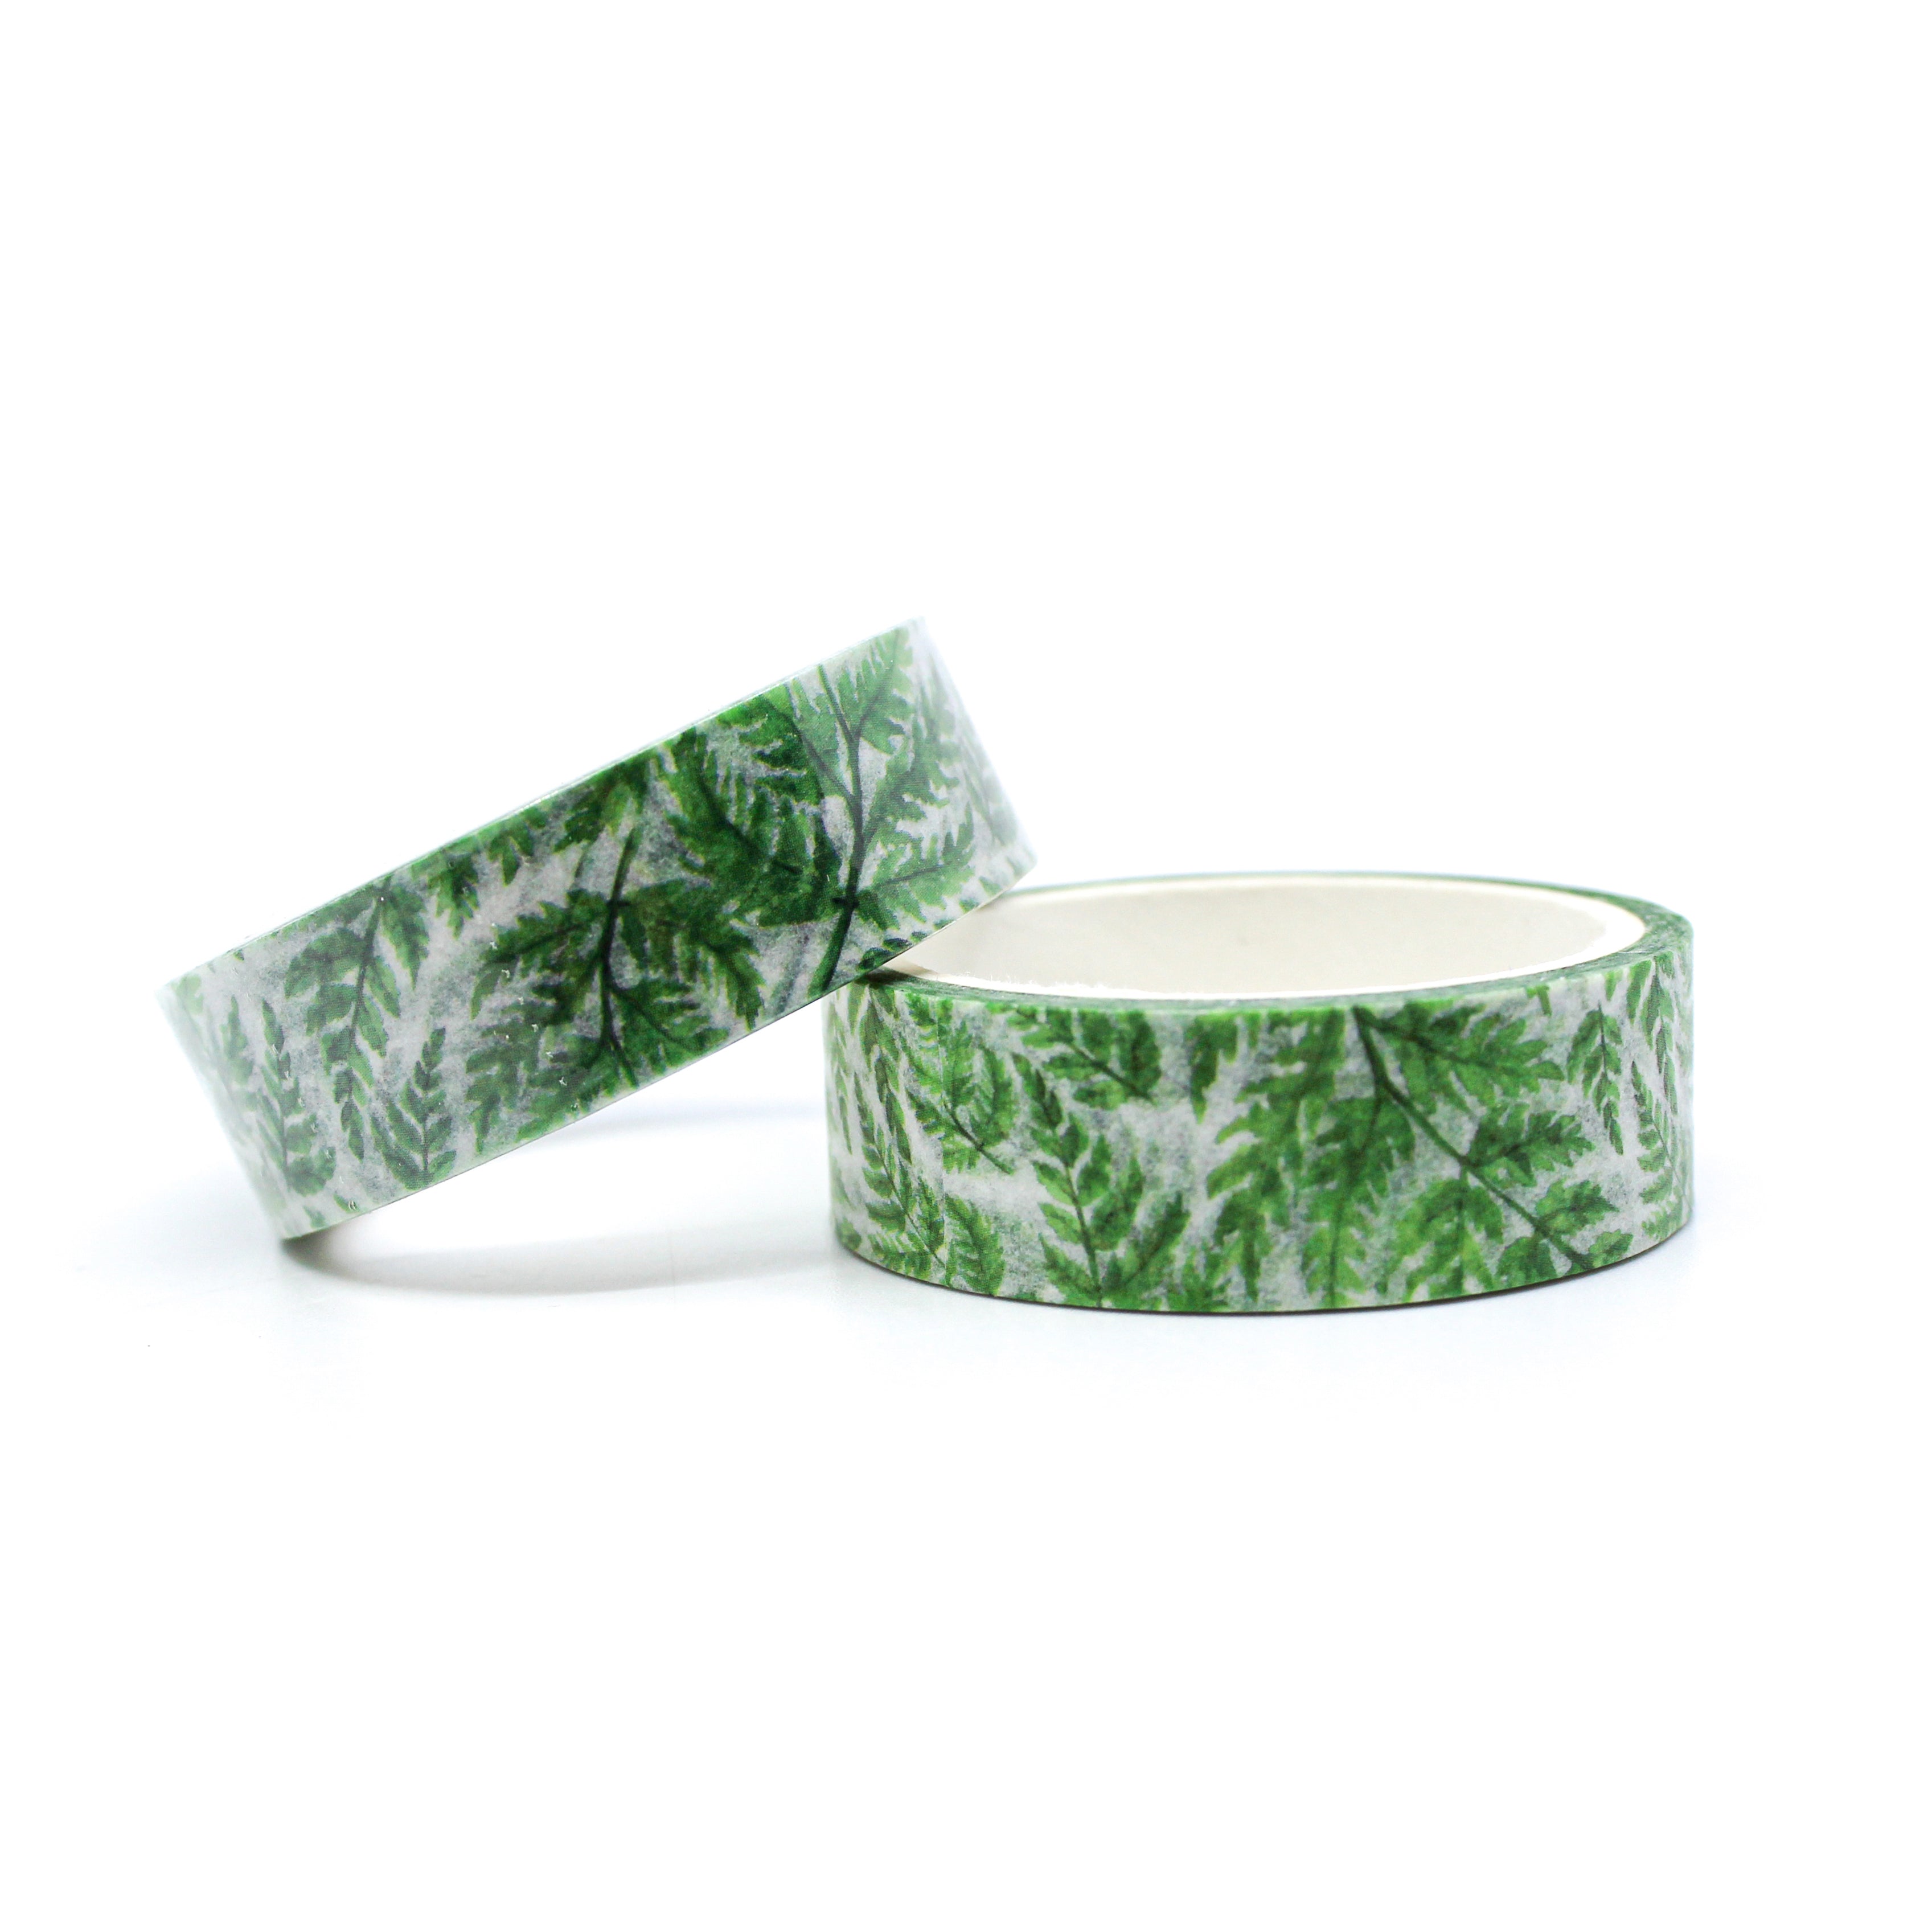 This a green fern leaf pattern washi tape for Journal Supplies, Scrapbooking washi tapes from BBB Supplies Craft Shop